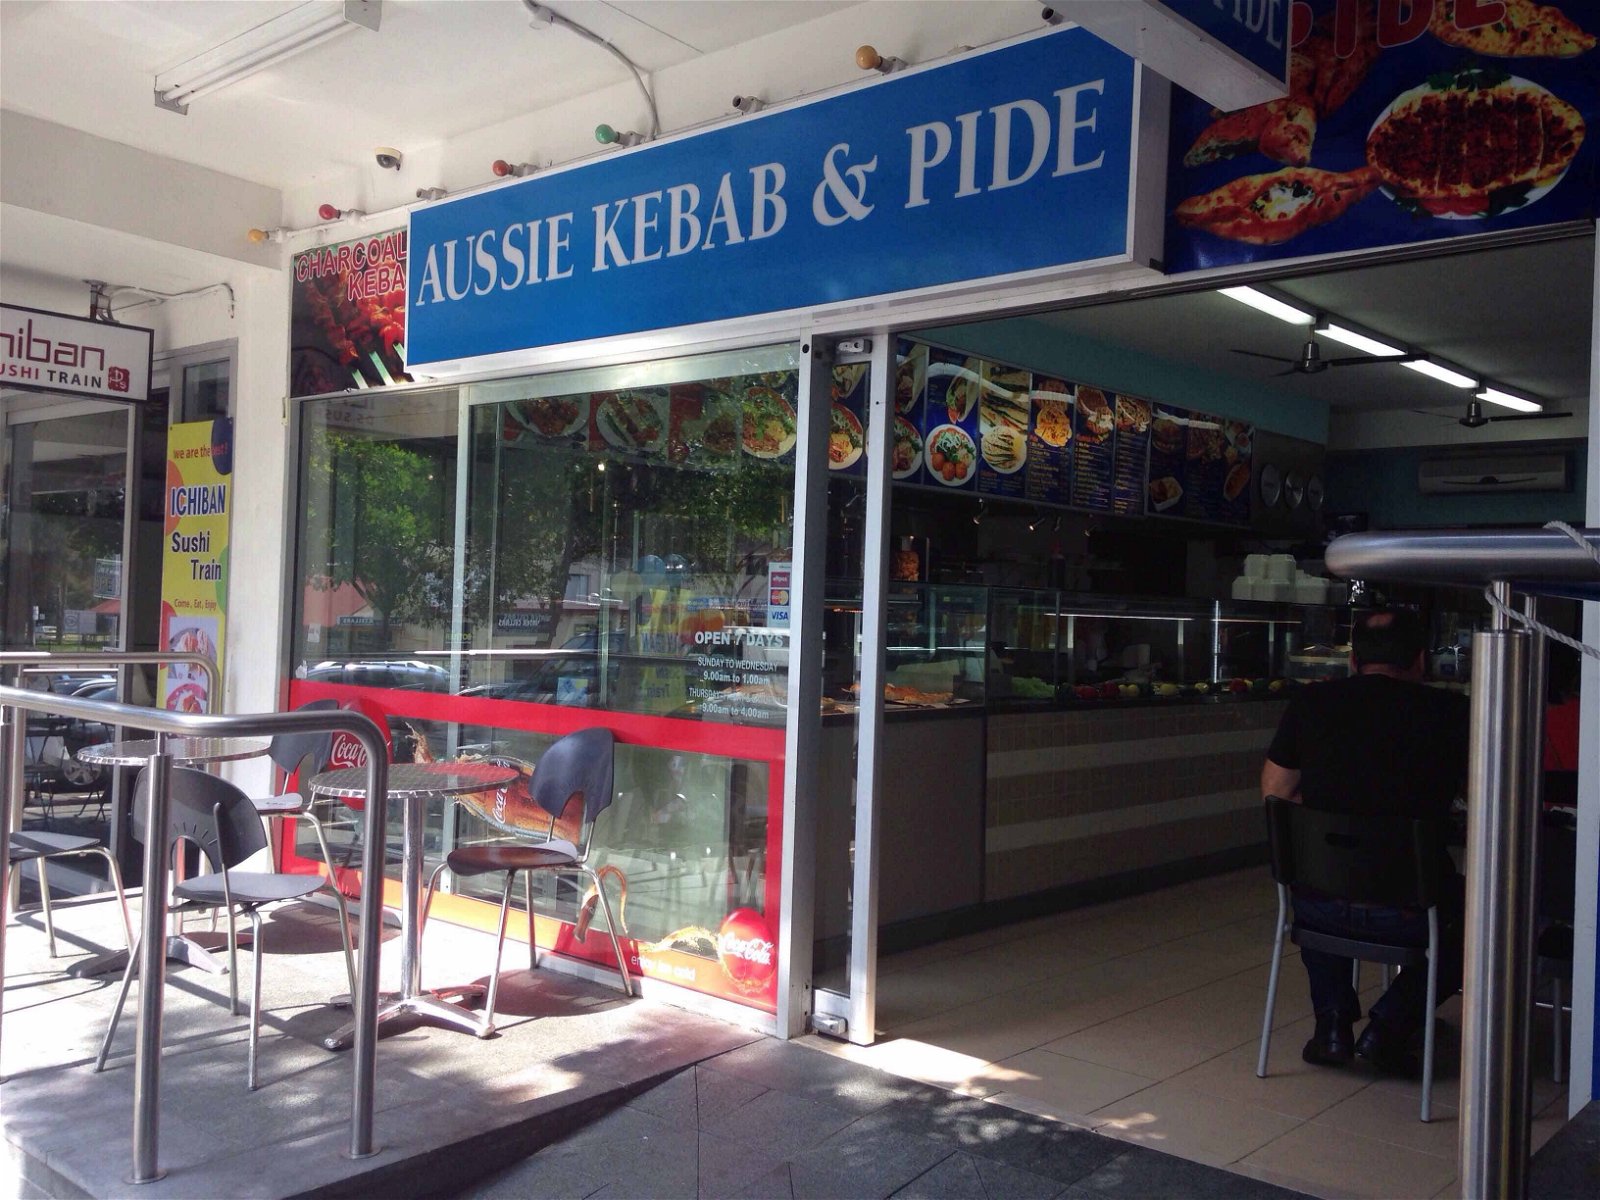 Aussie Kebab  Pide - Northern Rivers Accommodation